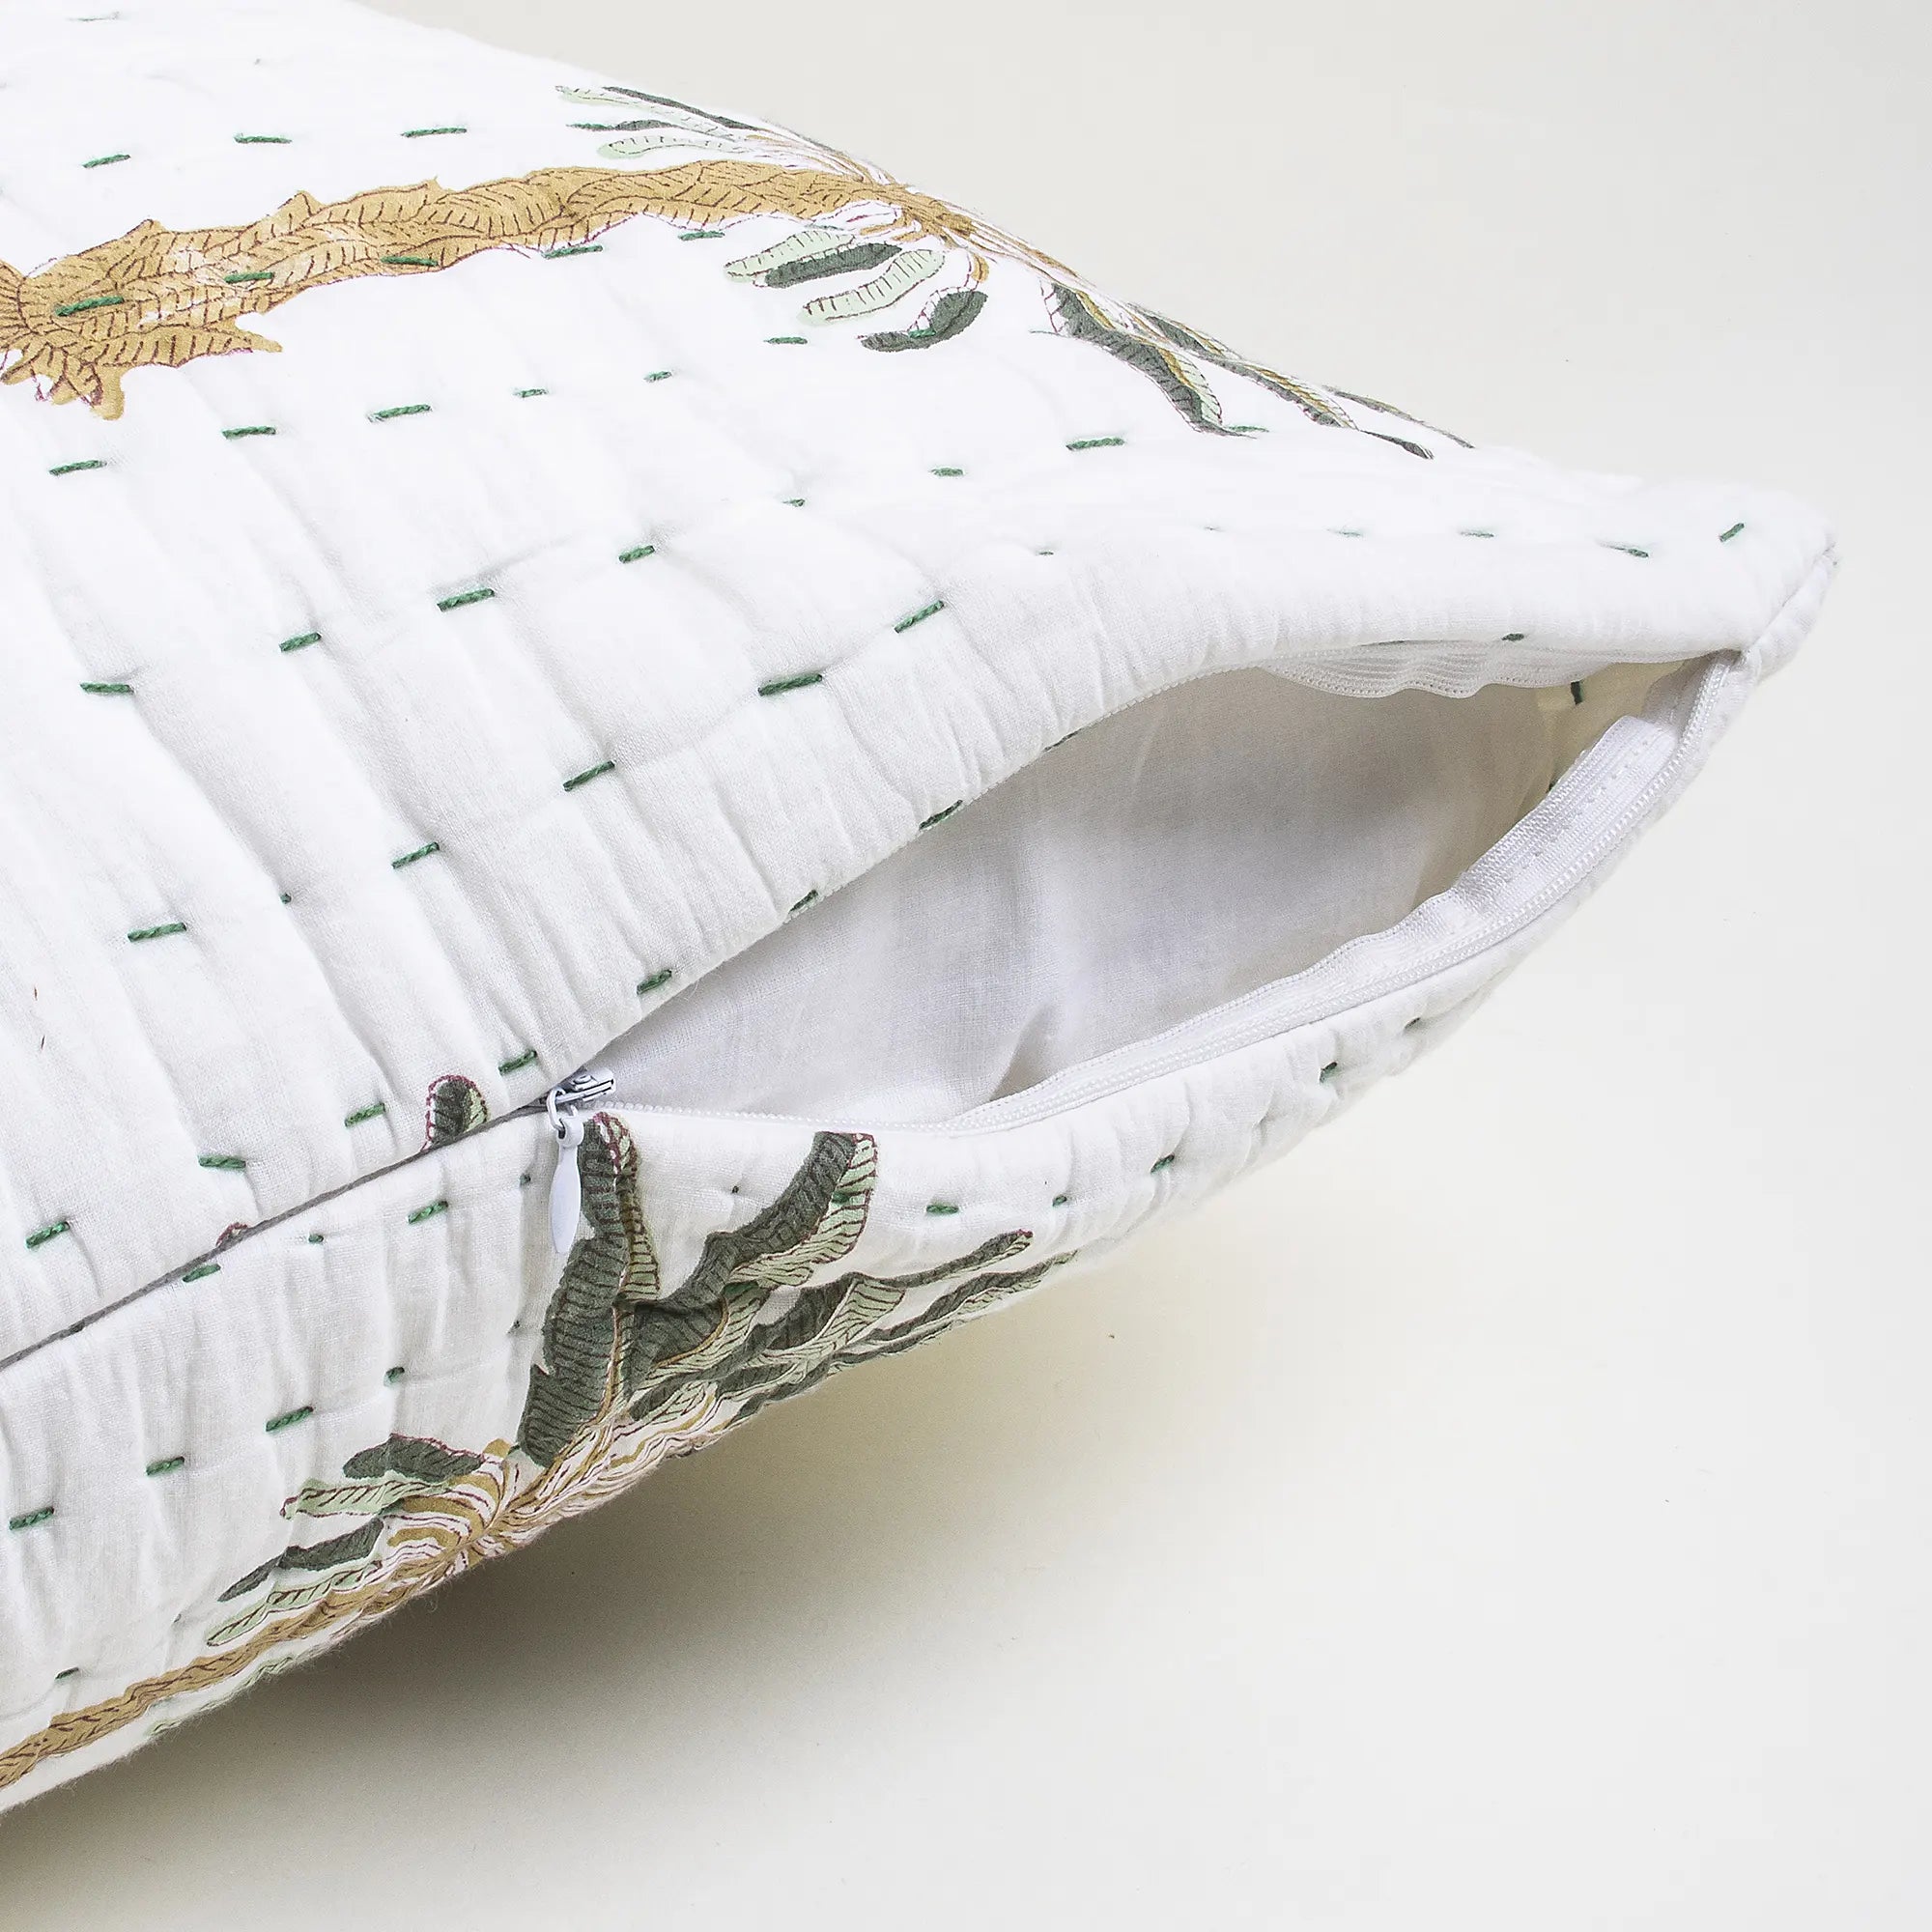 Palm Print Handmade Bed Pillow Covers